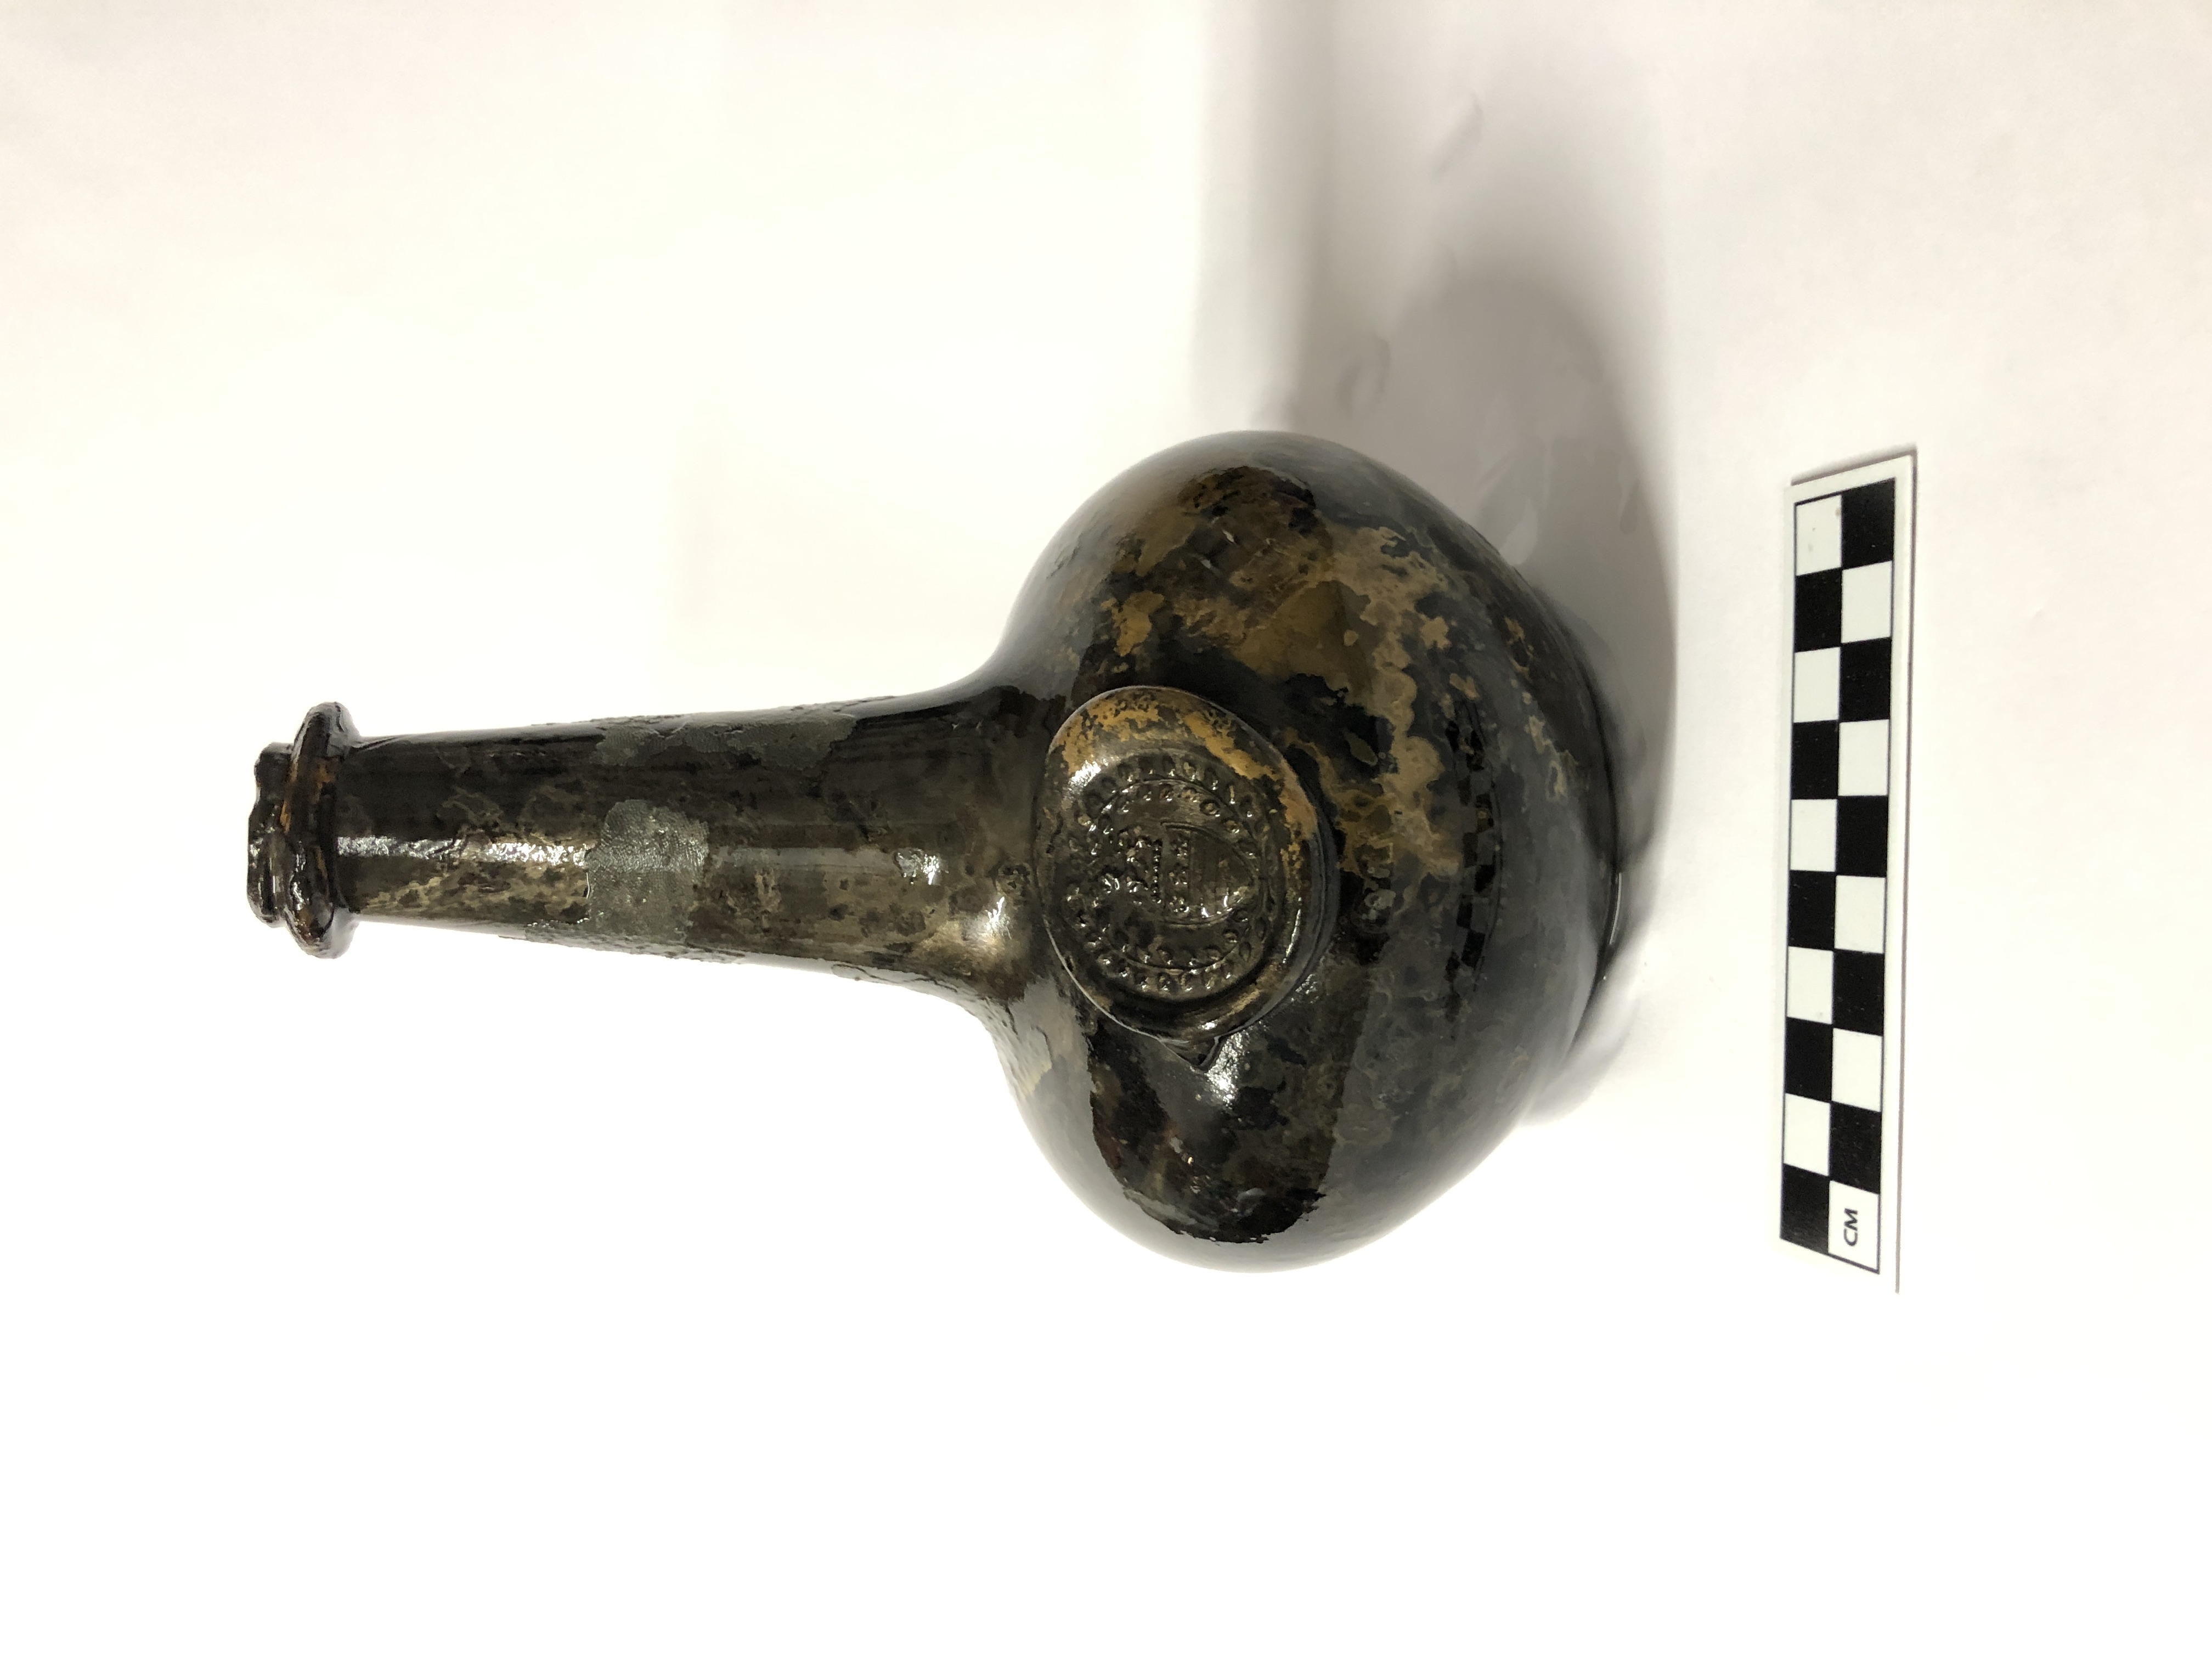 One of the bottles found with the wreck bears a glass seal with the crest of the Legge family - ancestors of George Washington, the first US President. (Norfolk Historic Shipwrecks/ PA)